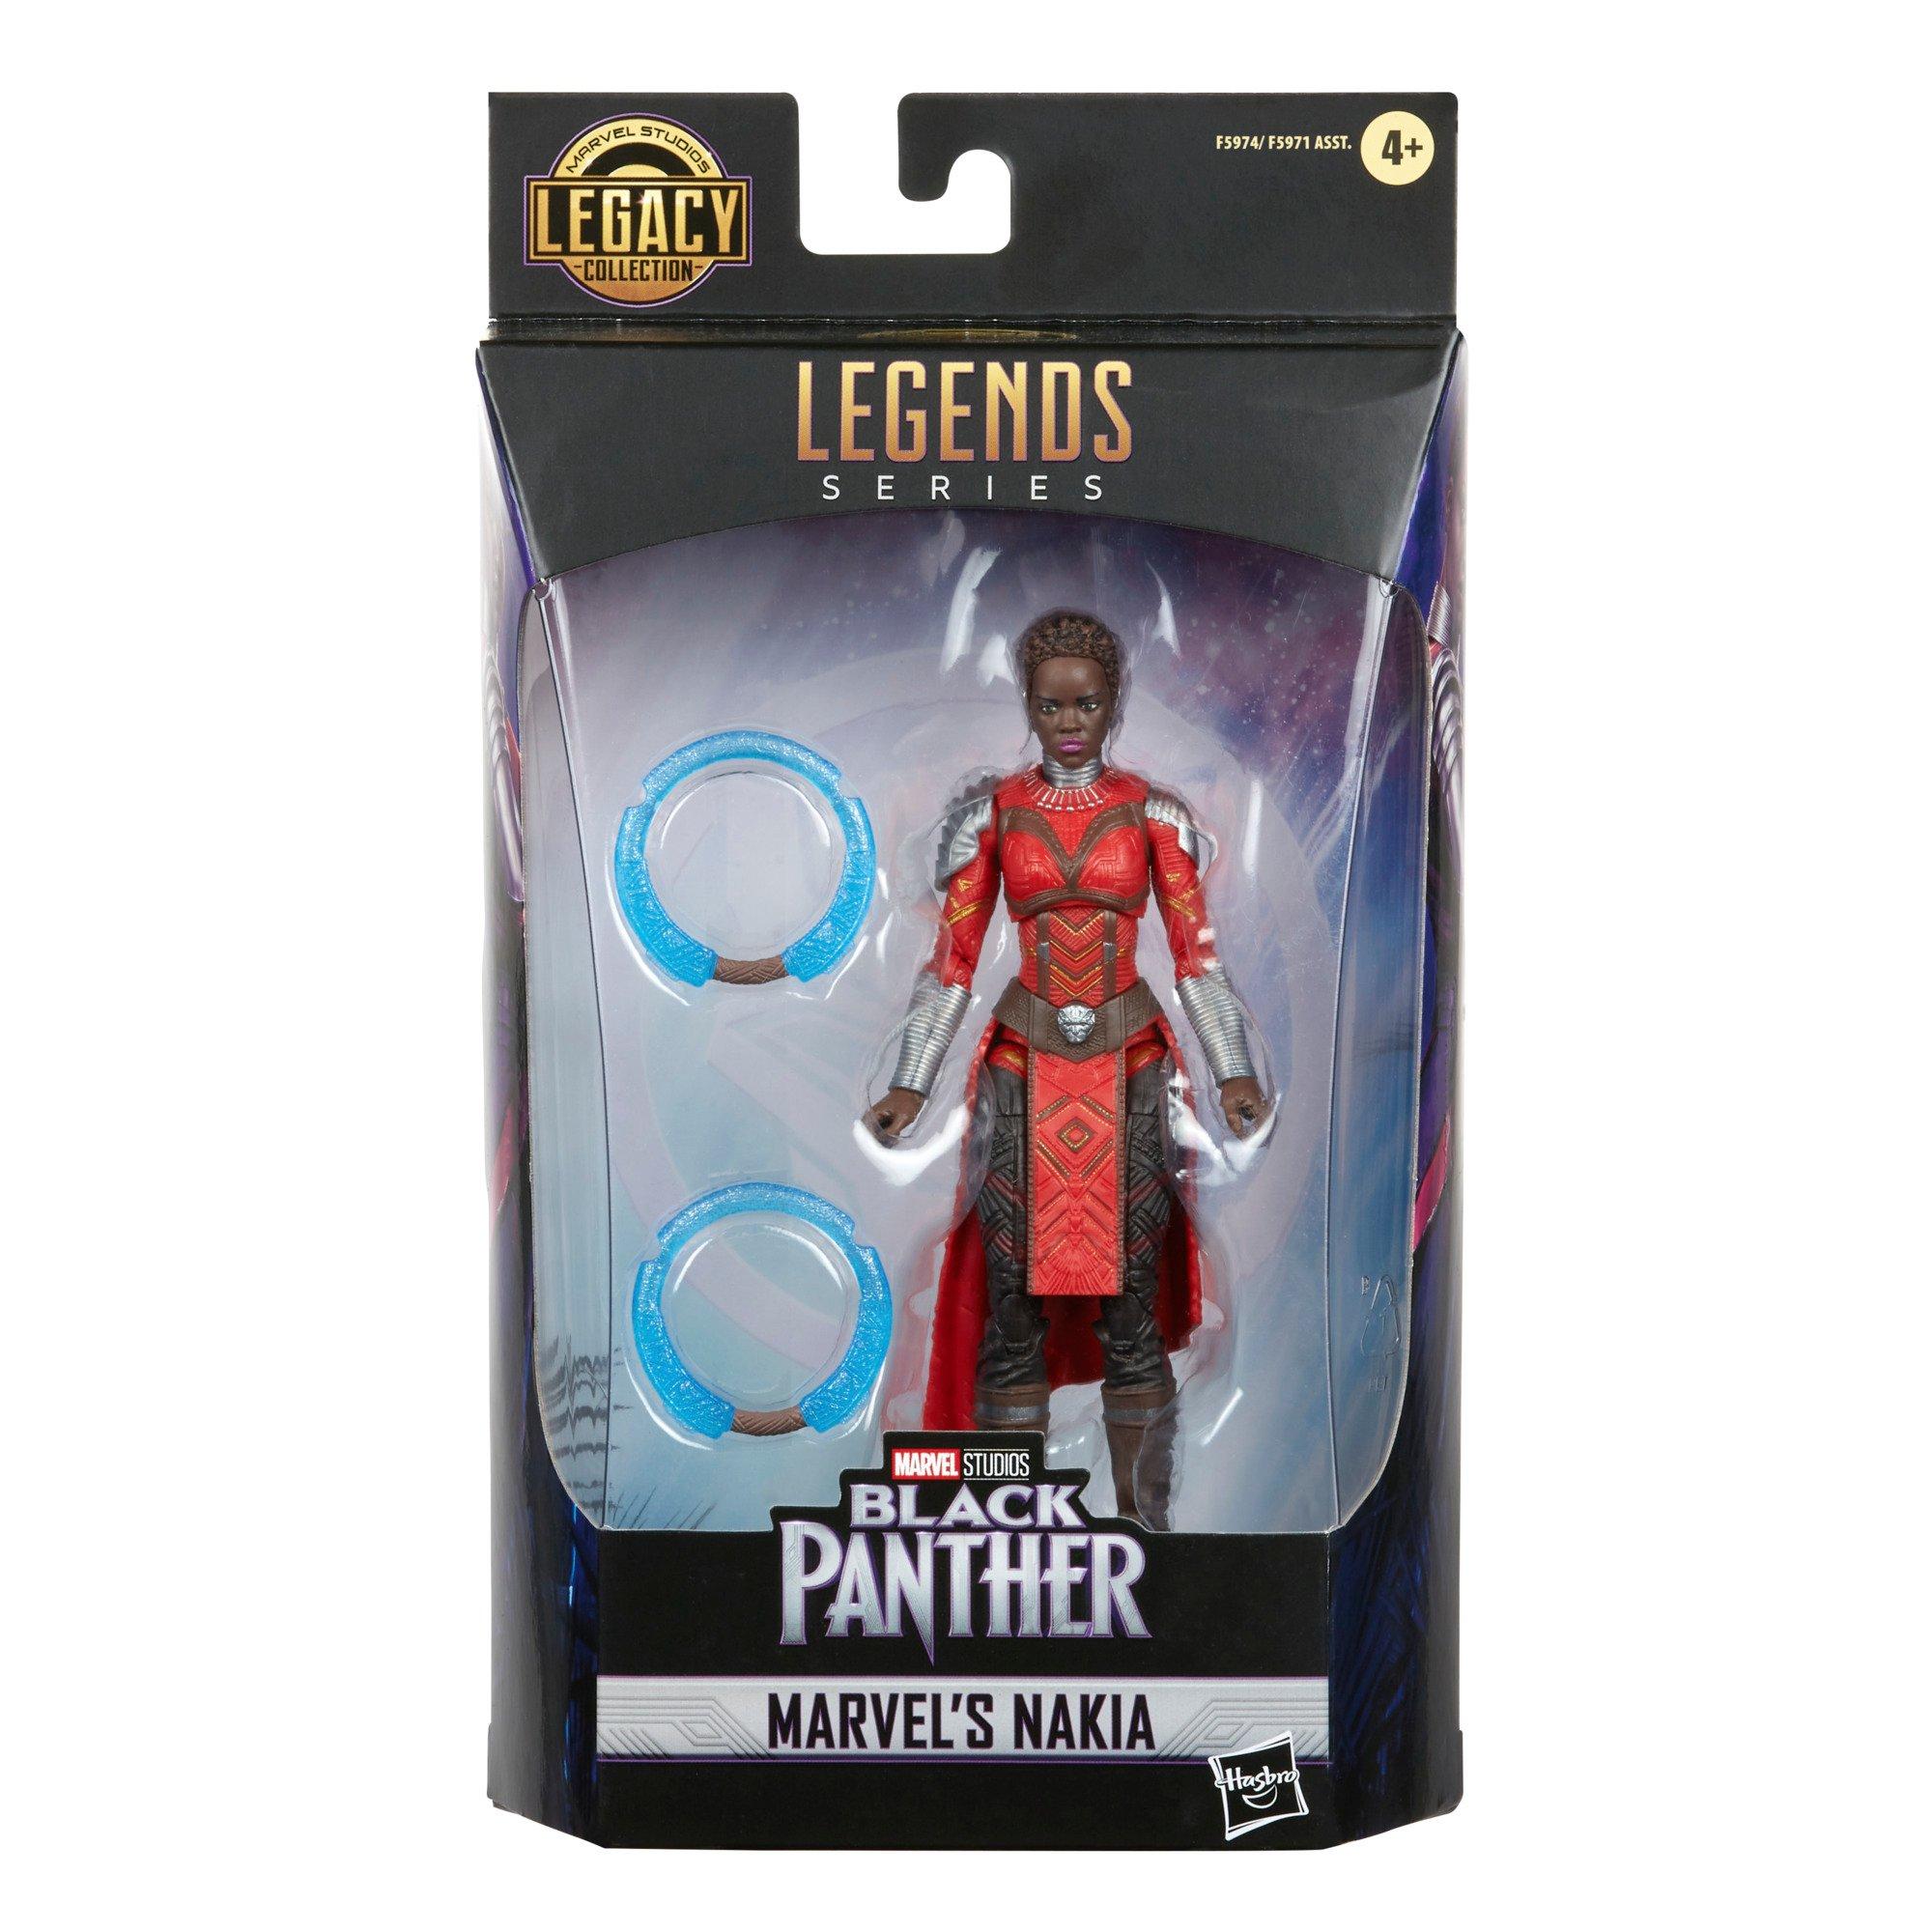 Hasbro Marvel Studios Legend Series Black Panther Legacy Collection Marvel's Nakia 6-in Action Figure